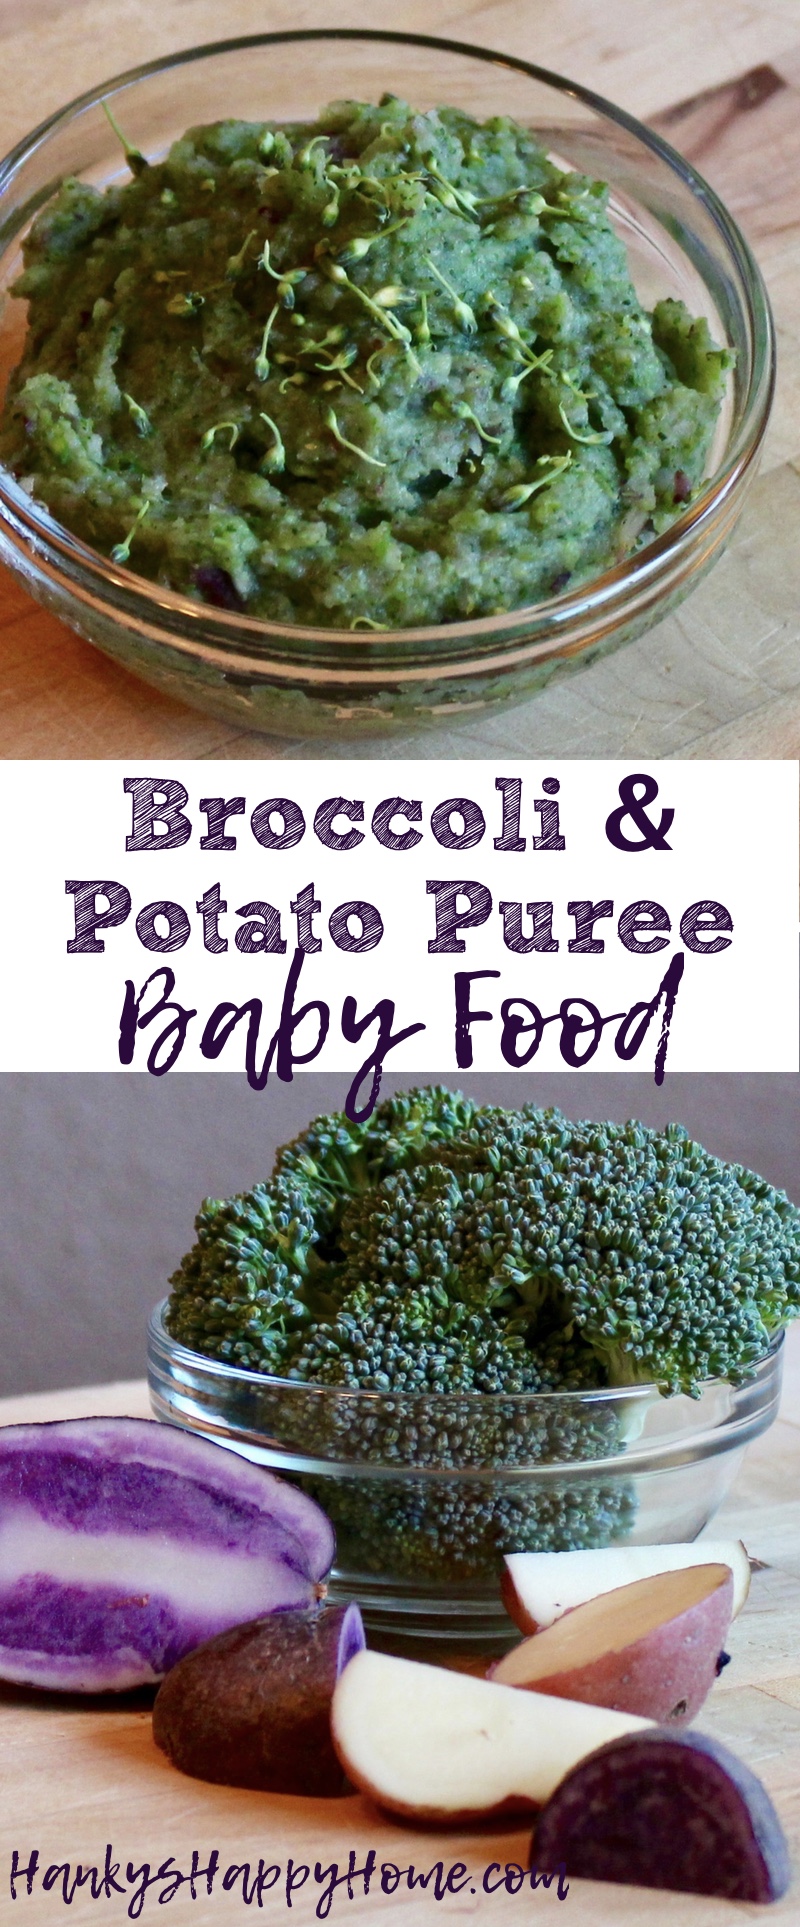 This Broccoli & Potato Puree makes a delicious baby food that tastes like mashed potatoes for baby!